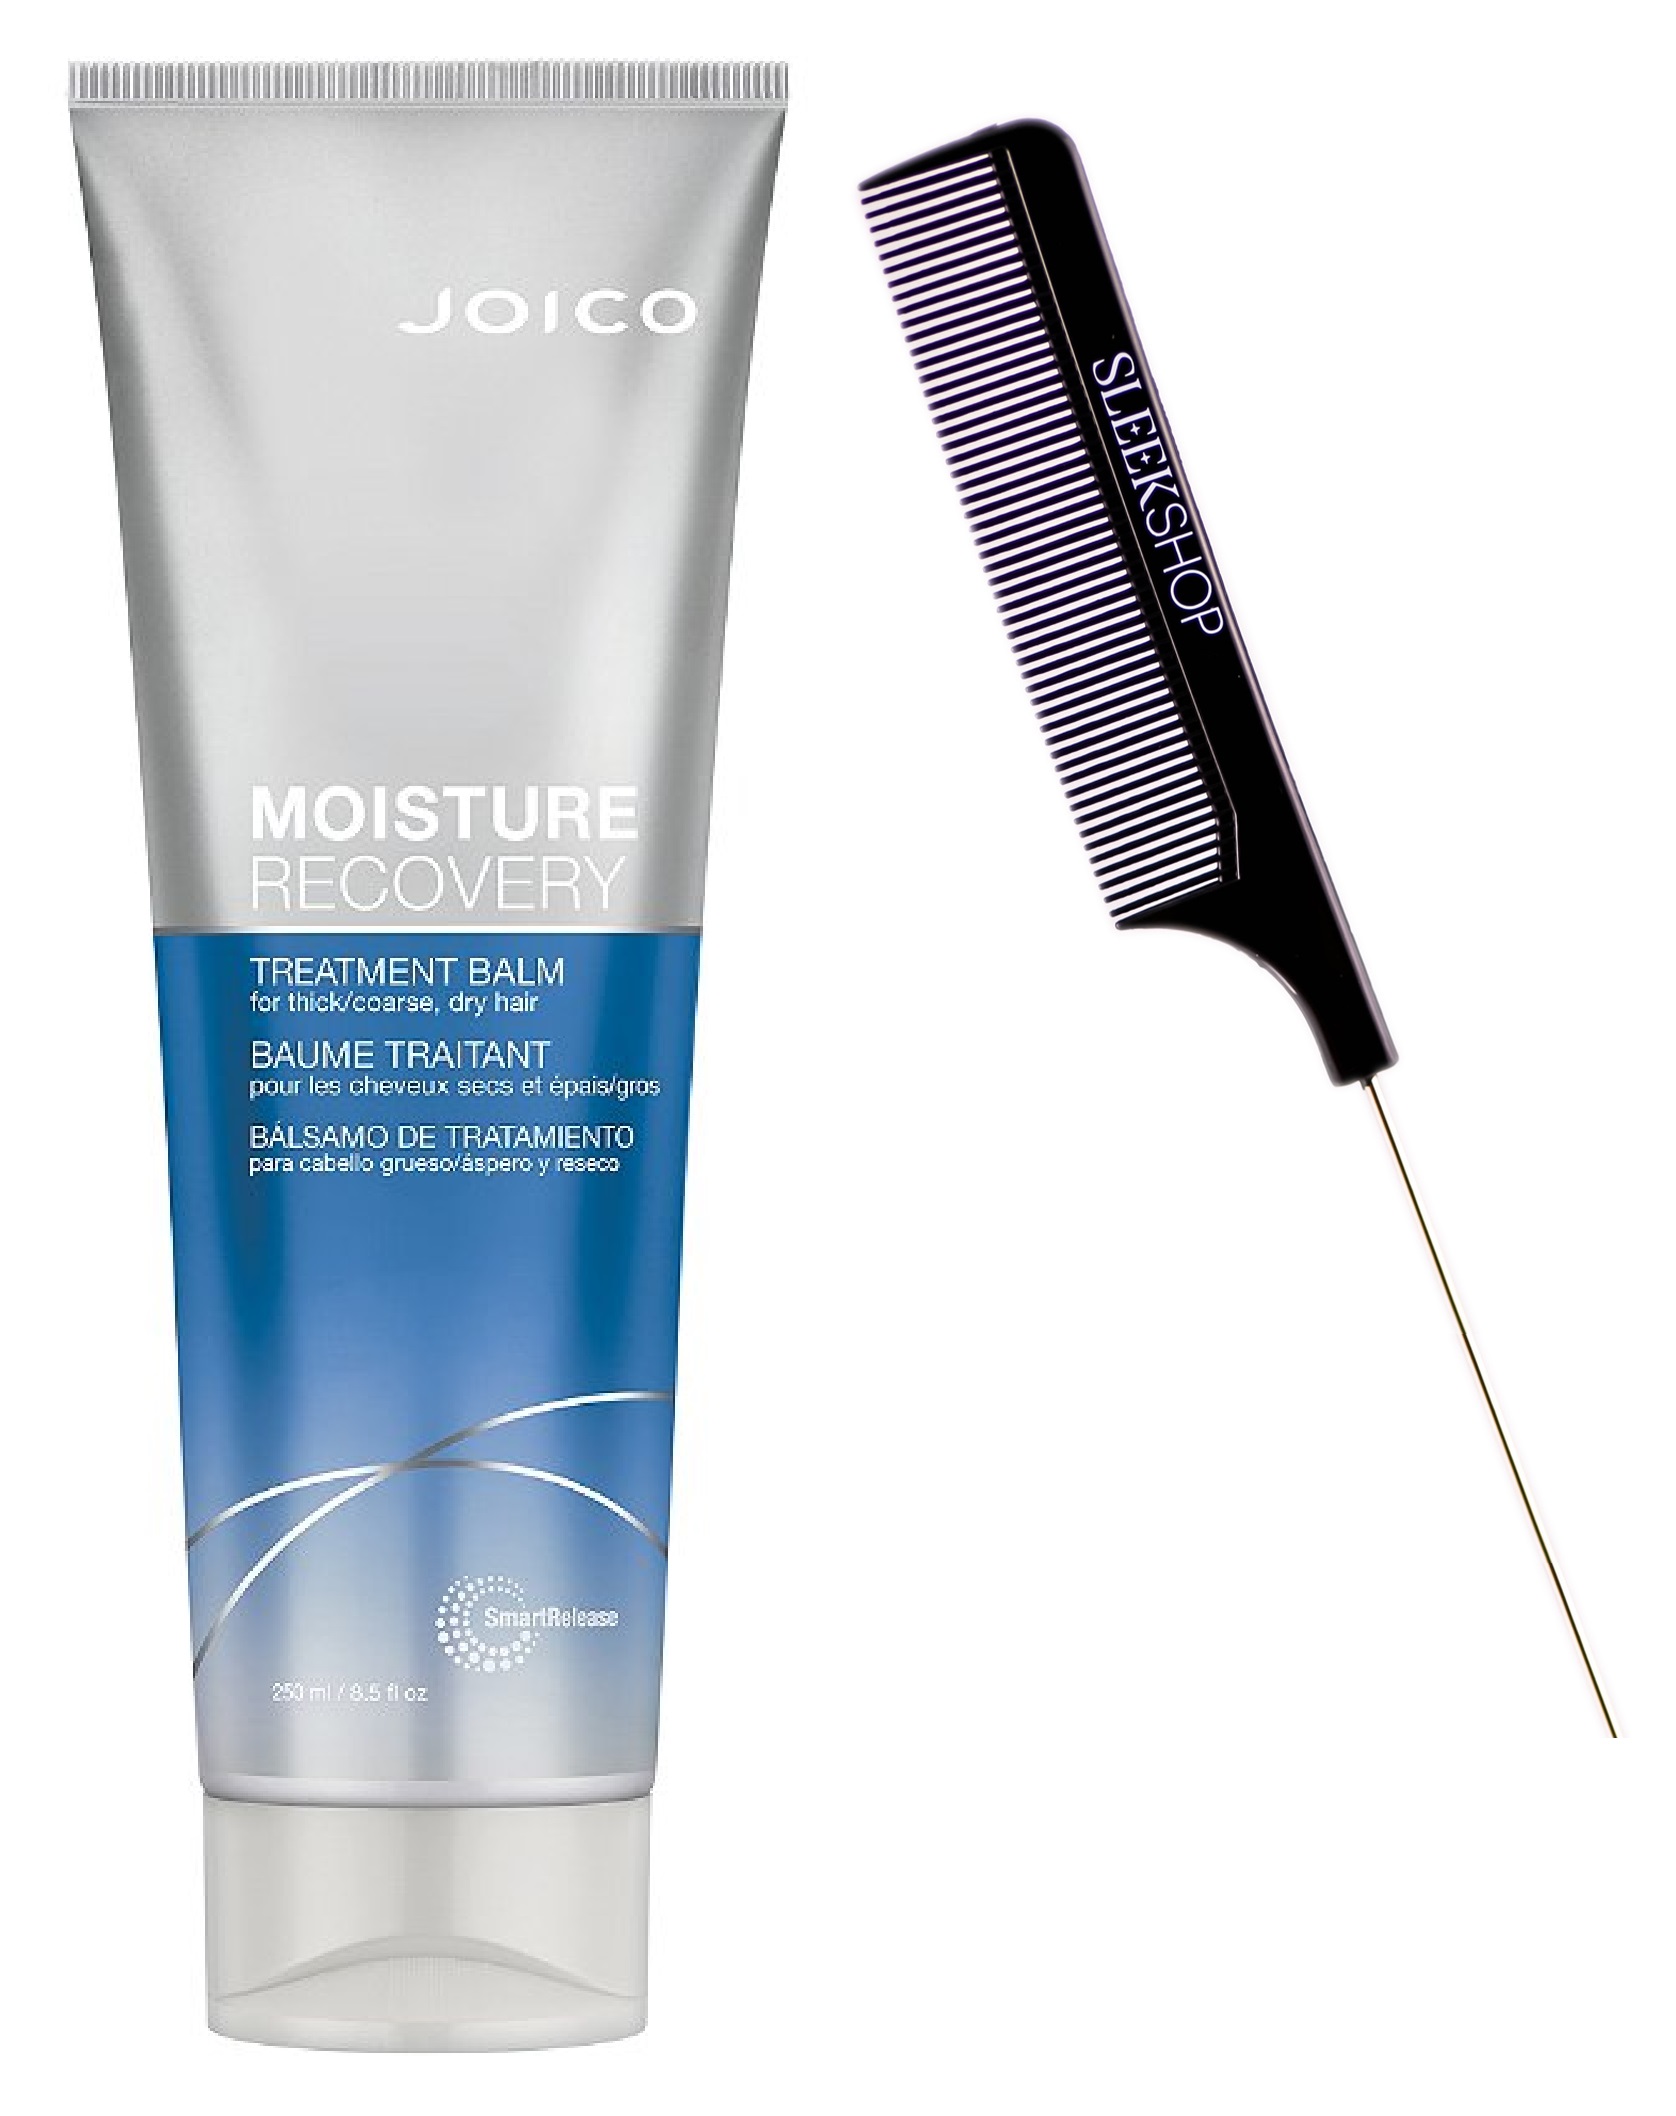 Joico Moisture Recovery Treatment Balm for Thick/Coarse, Dry Hair (Newest & Latest Packaging) Mask Masque w/ Sleek Steel Pin Rat Tail Comb (8.5 oz / 250 ml - TUBE SIZE) - image 1 of 1